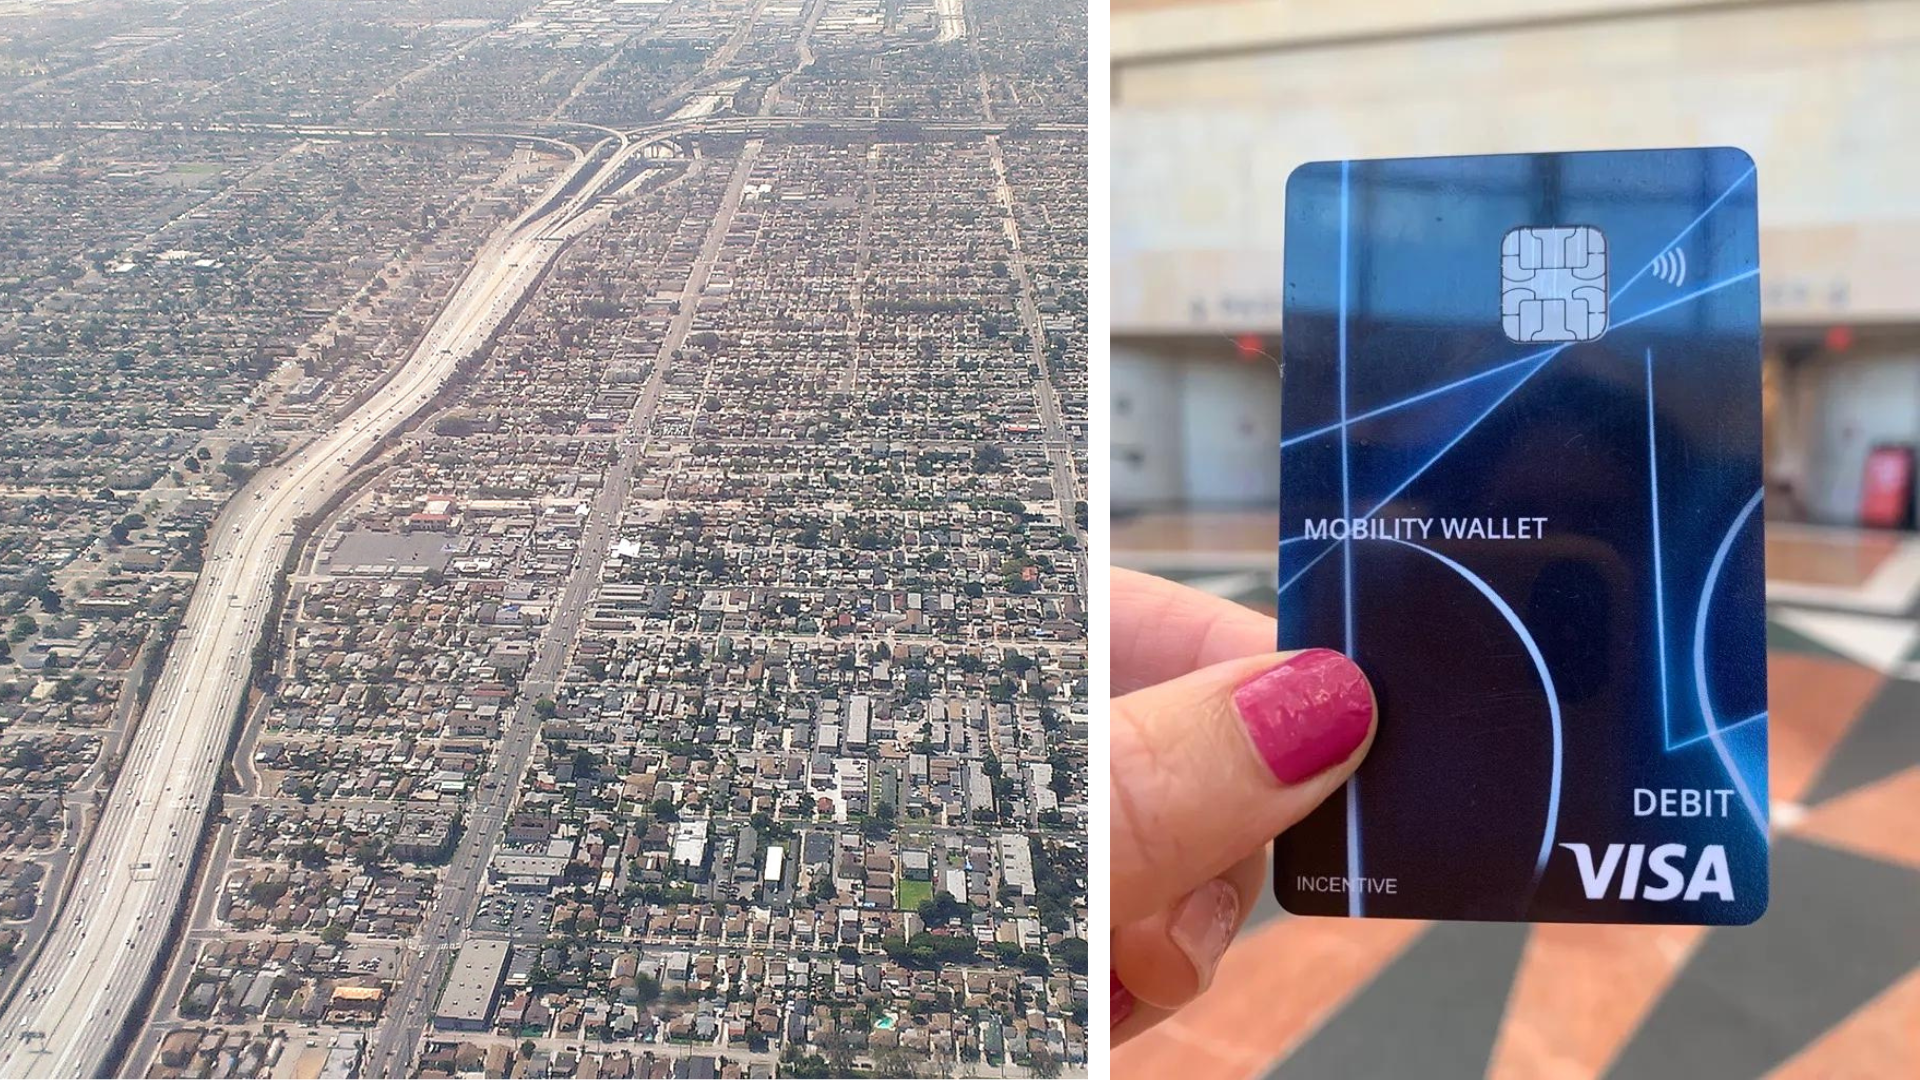 Collage of aerial shot of South Los Angeles junction of 110/105 freeways on left, and close-up of Mobility Wallet debit card on right. Source: CC0 1.0, LA Metro